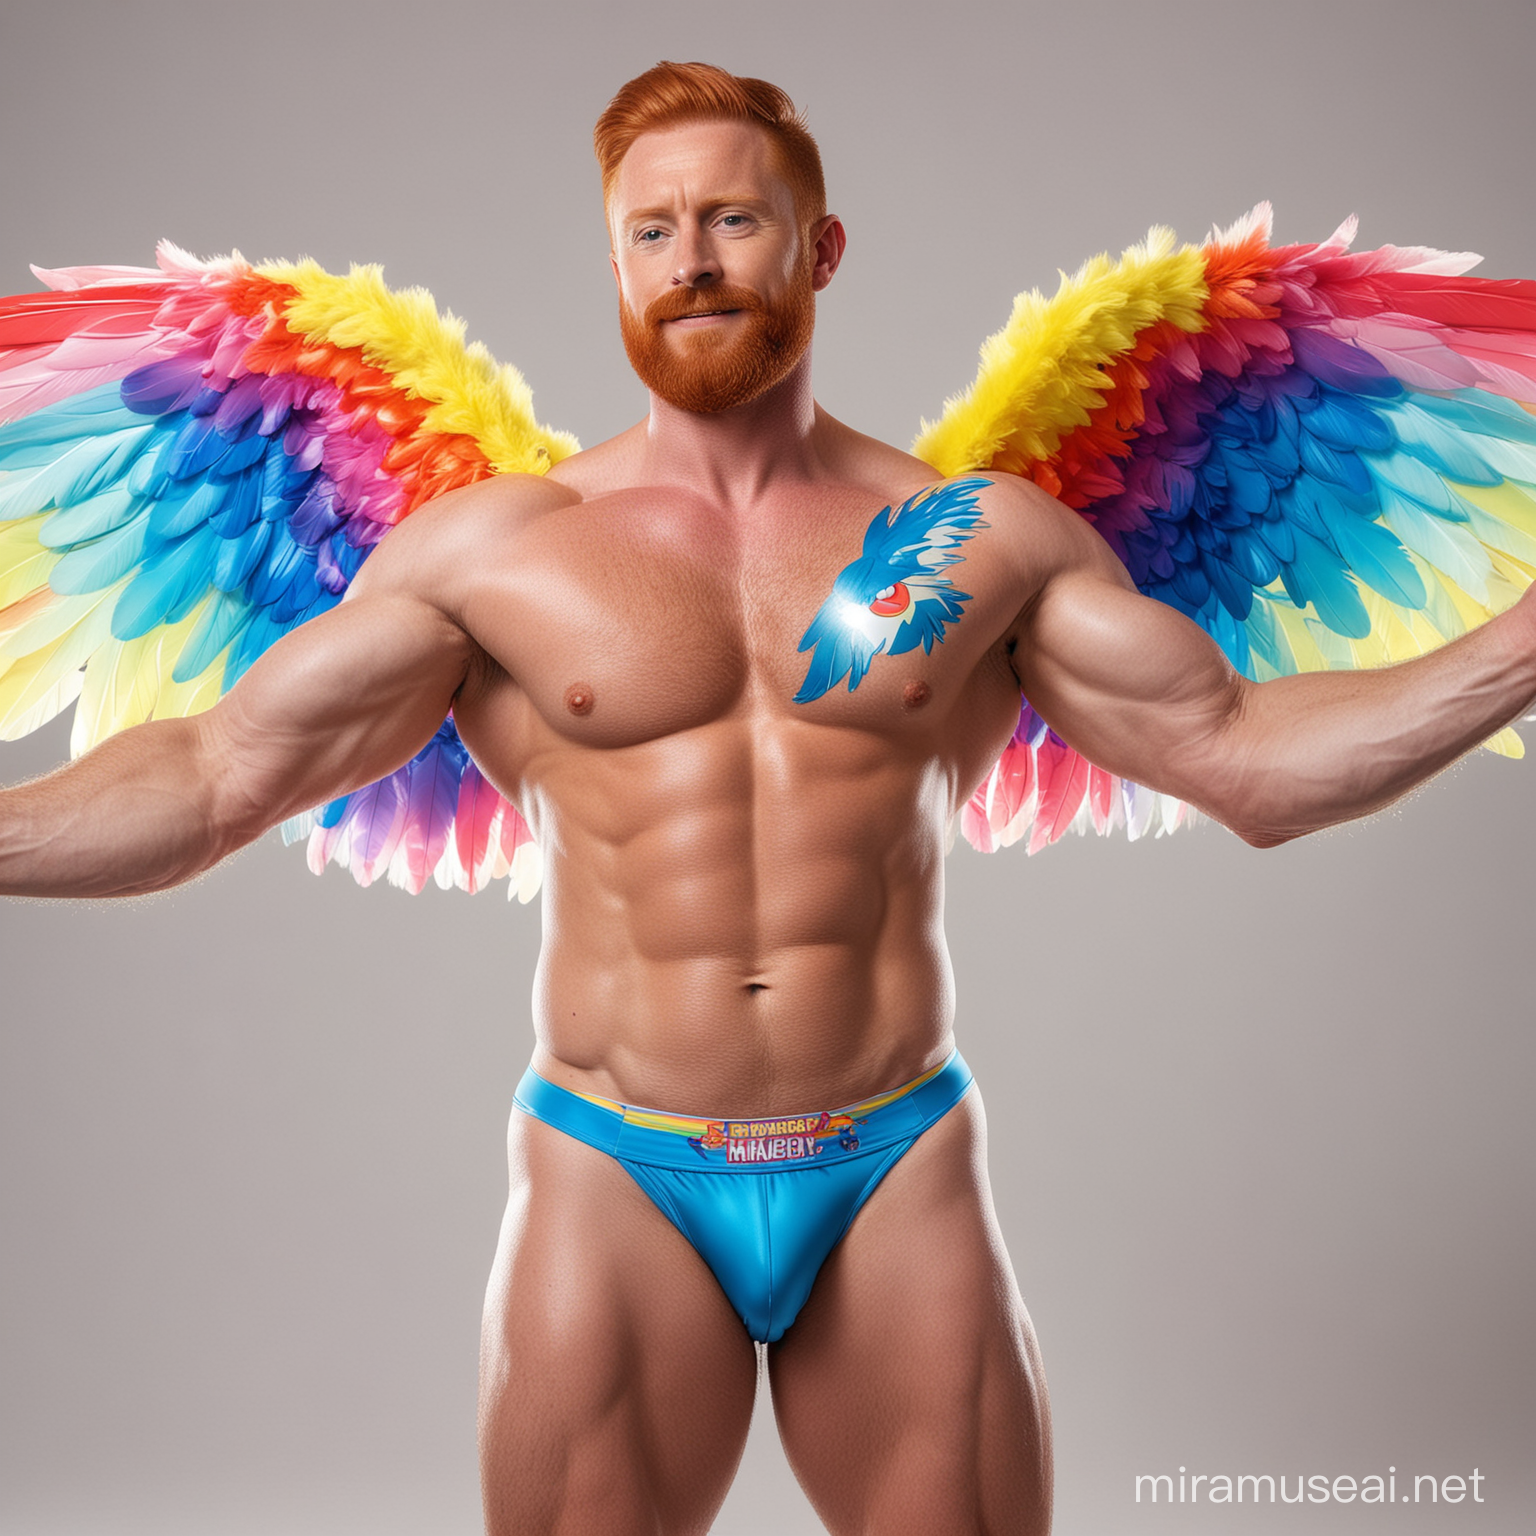 Topless 30s Ultra Beefy Redhead IFBB Bodybuilder Beard Daddy wearing Multi-Highlighter Bright Rainbow Coloured See Through Jacket with Eagle wings and Flexing Big Strong Arm with doraemon